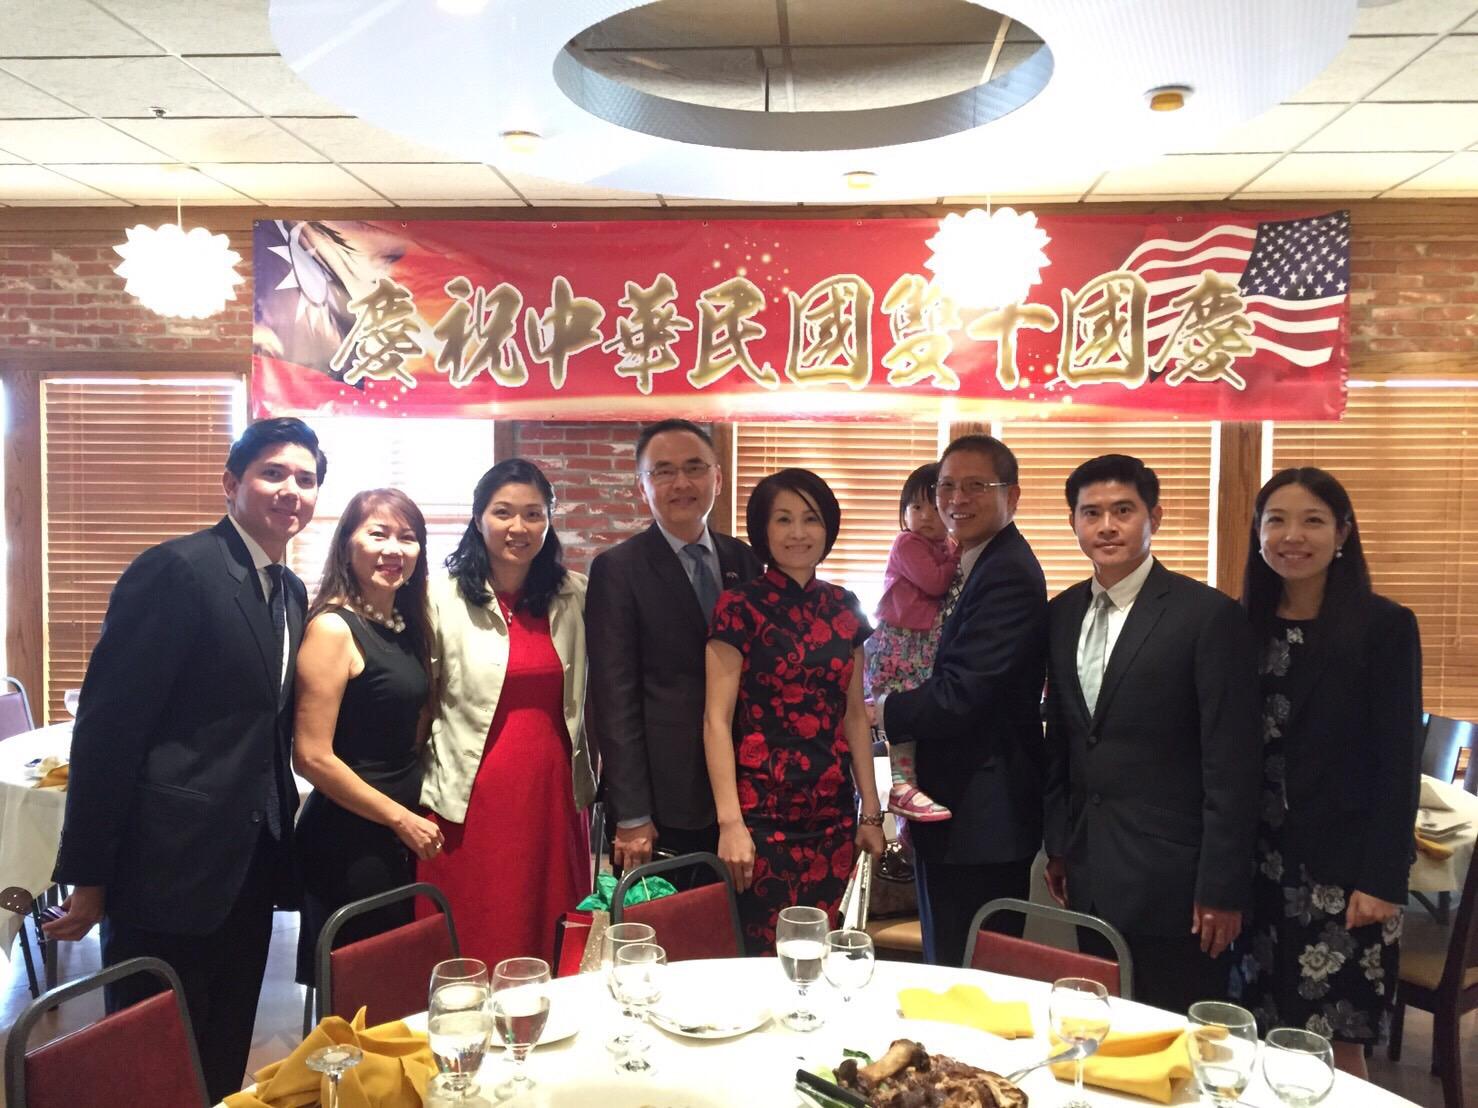 Director General and Mrs. Jerry Chang with Ms. Nancy Tan, former Chairman of the Double Tenth Celebration Committee of Colorado, and some guests